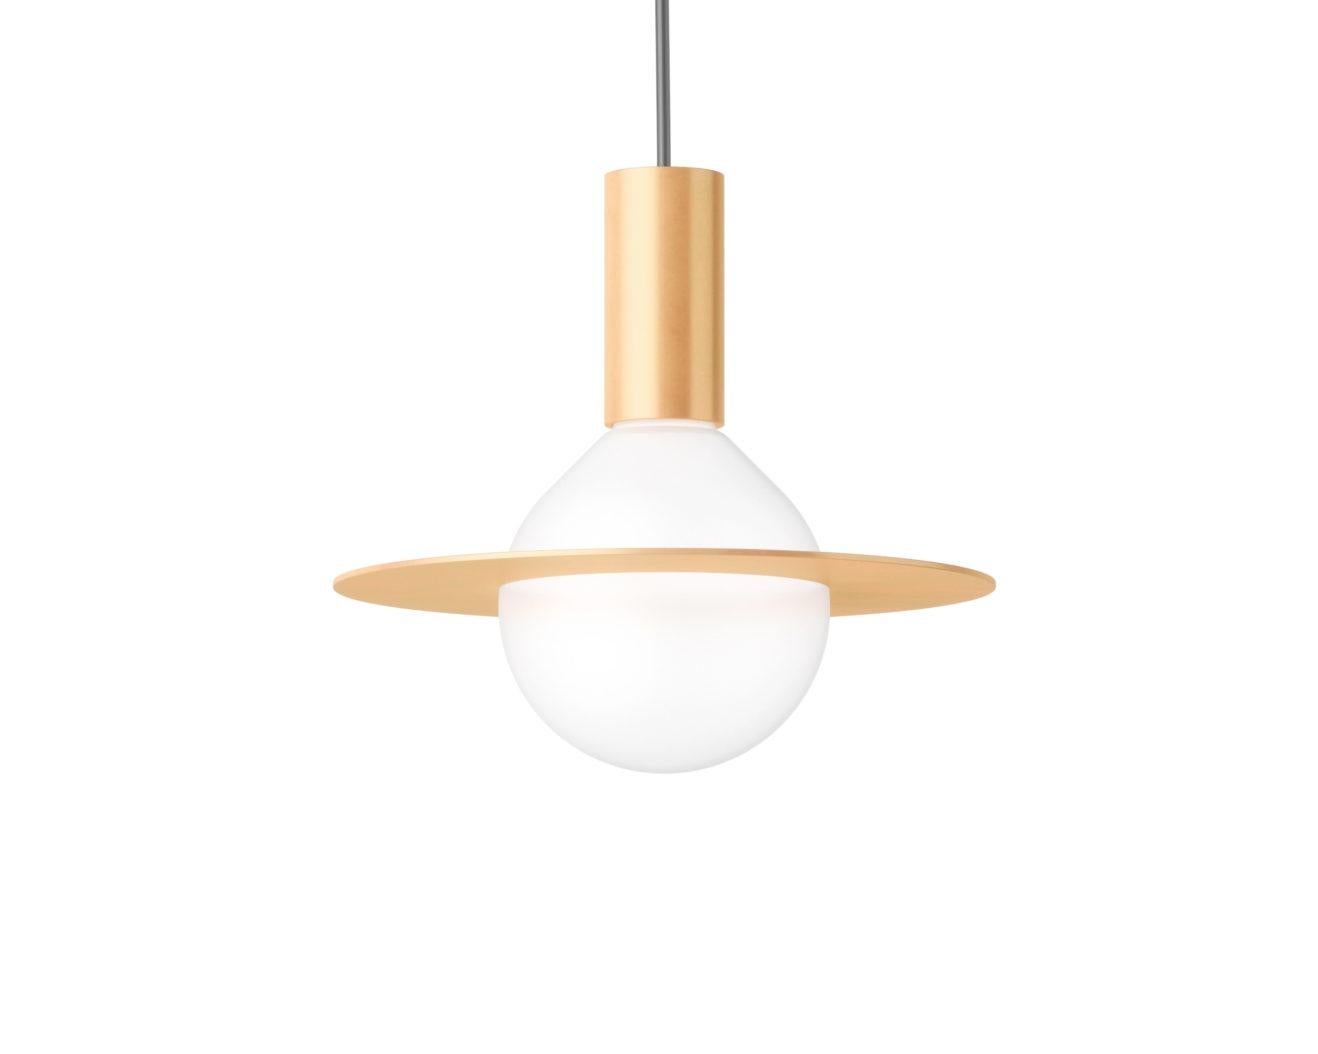 Orbis 40 is a Minimalist pendant lamp design by Wishnya Design Studio.
Brass finish. 

Measures: D 40cm
LED G9 60W 220V - US compatible
Dimmable
Adjustable wire

Two sizes available 
Two finishes available: copper, brass, aluminum.